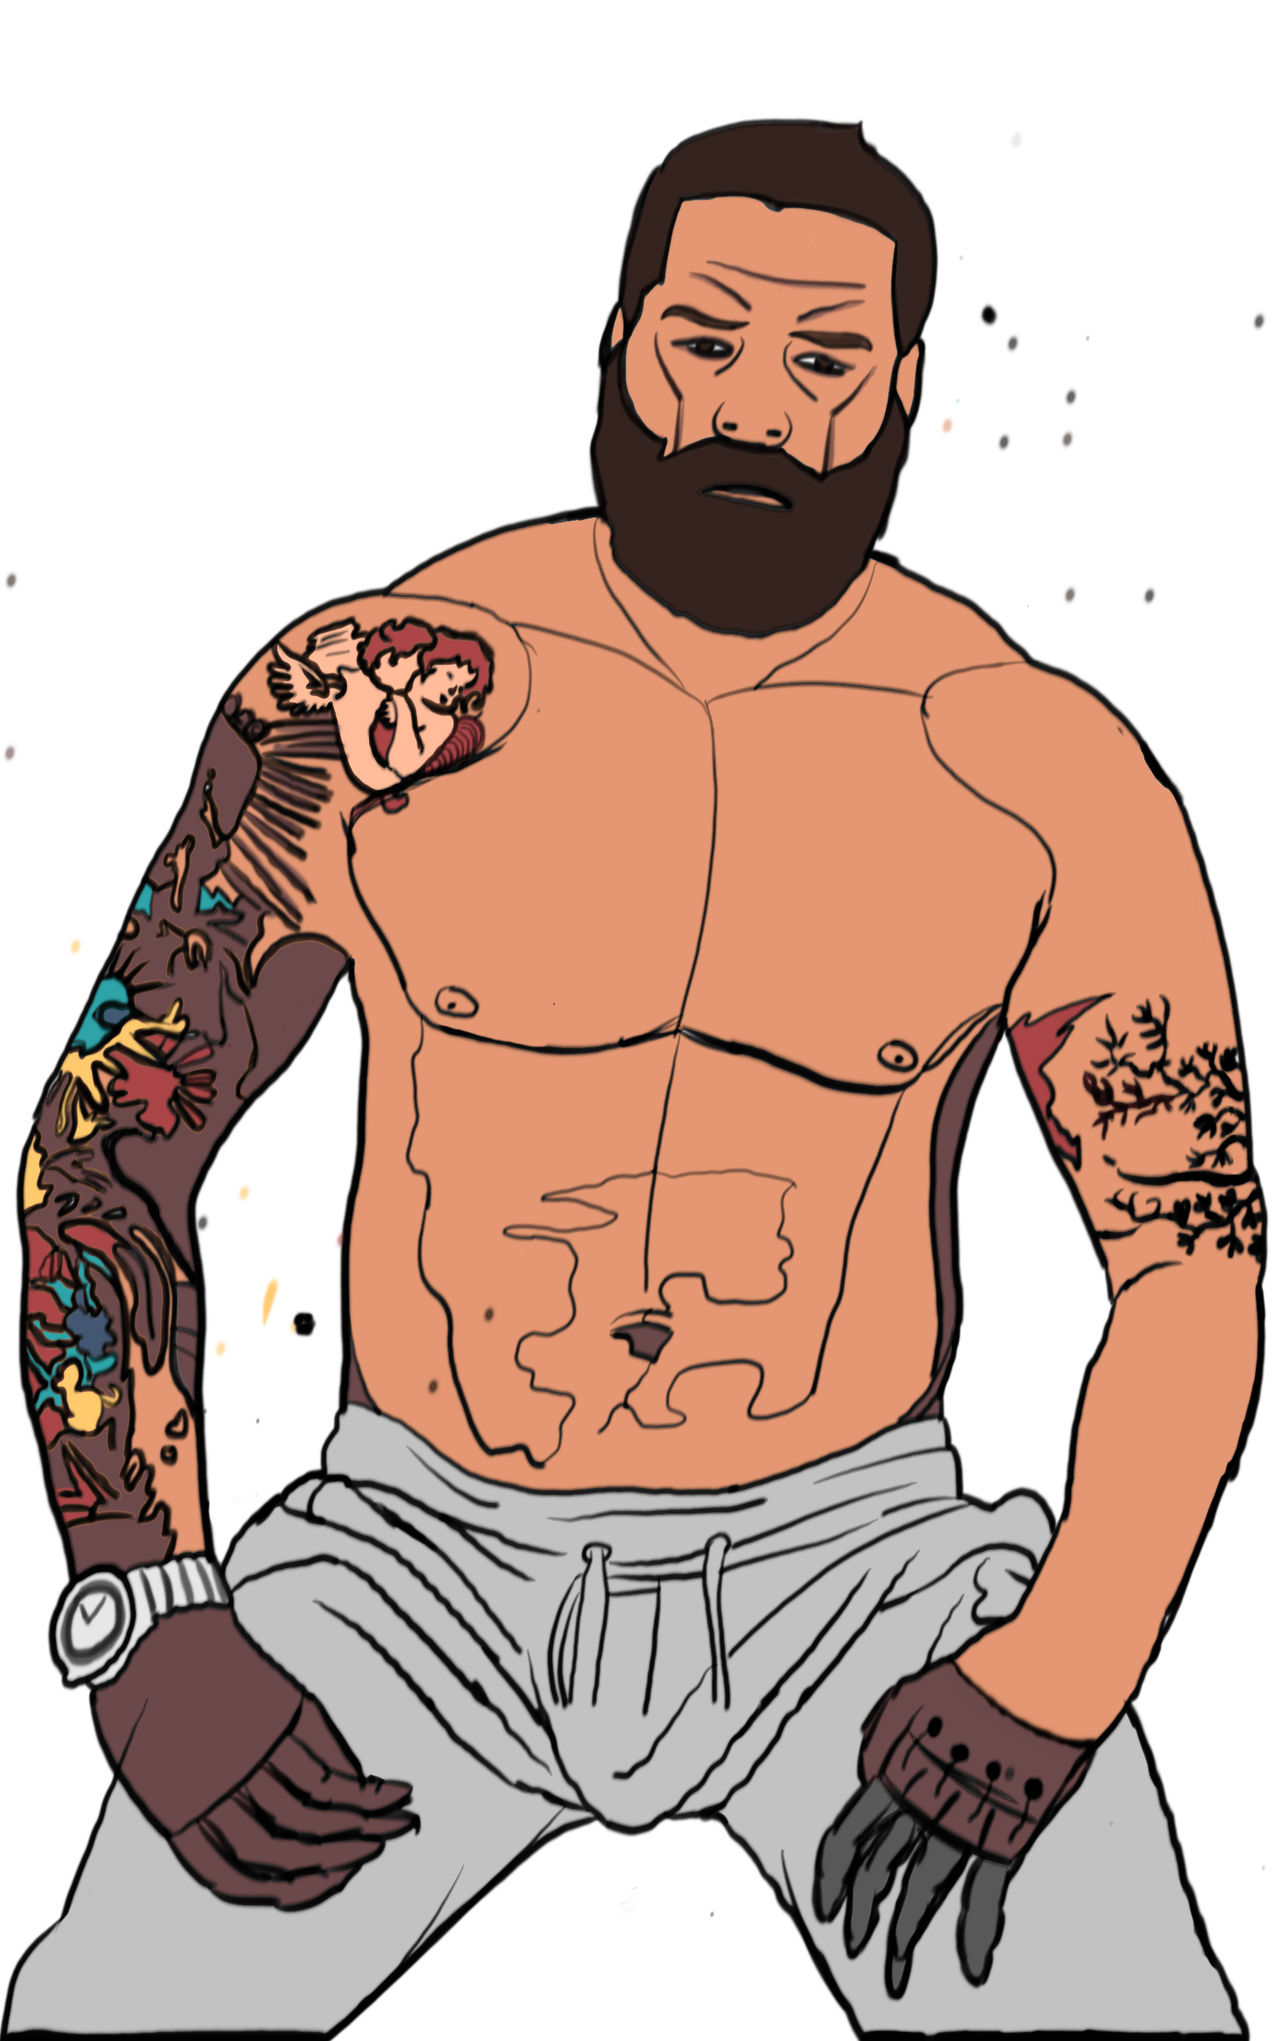 Shirtless Man with many tattoos by Whateverthisiswhatev on DeviantArt